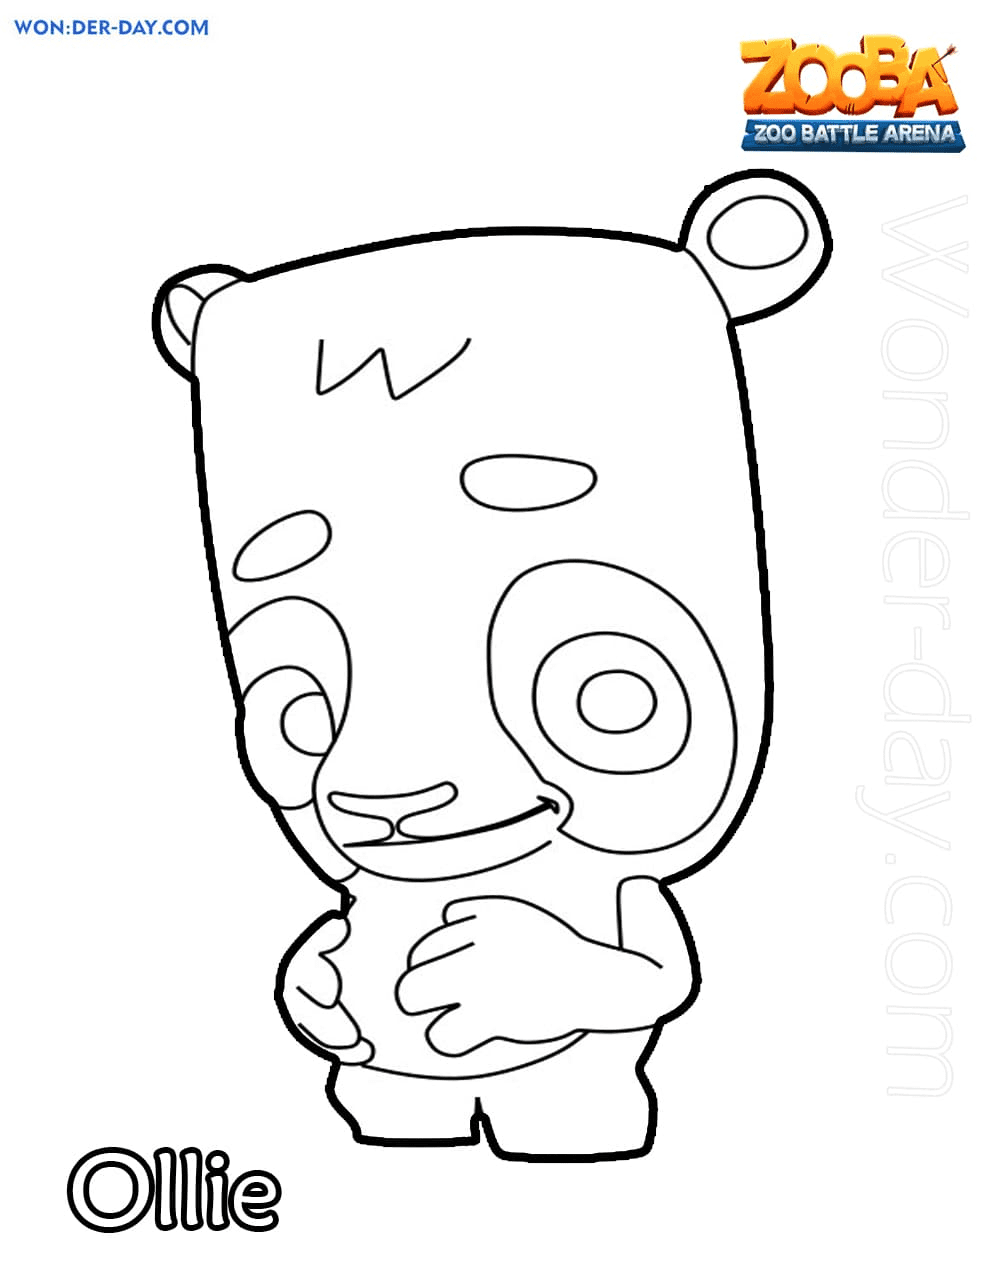 Ollie Zooba Coloring Page